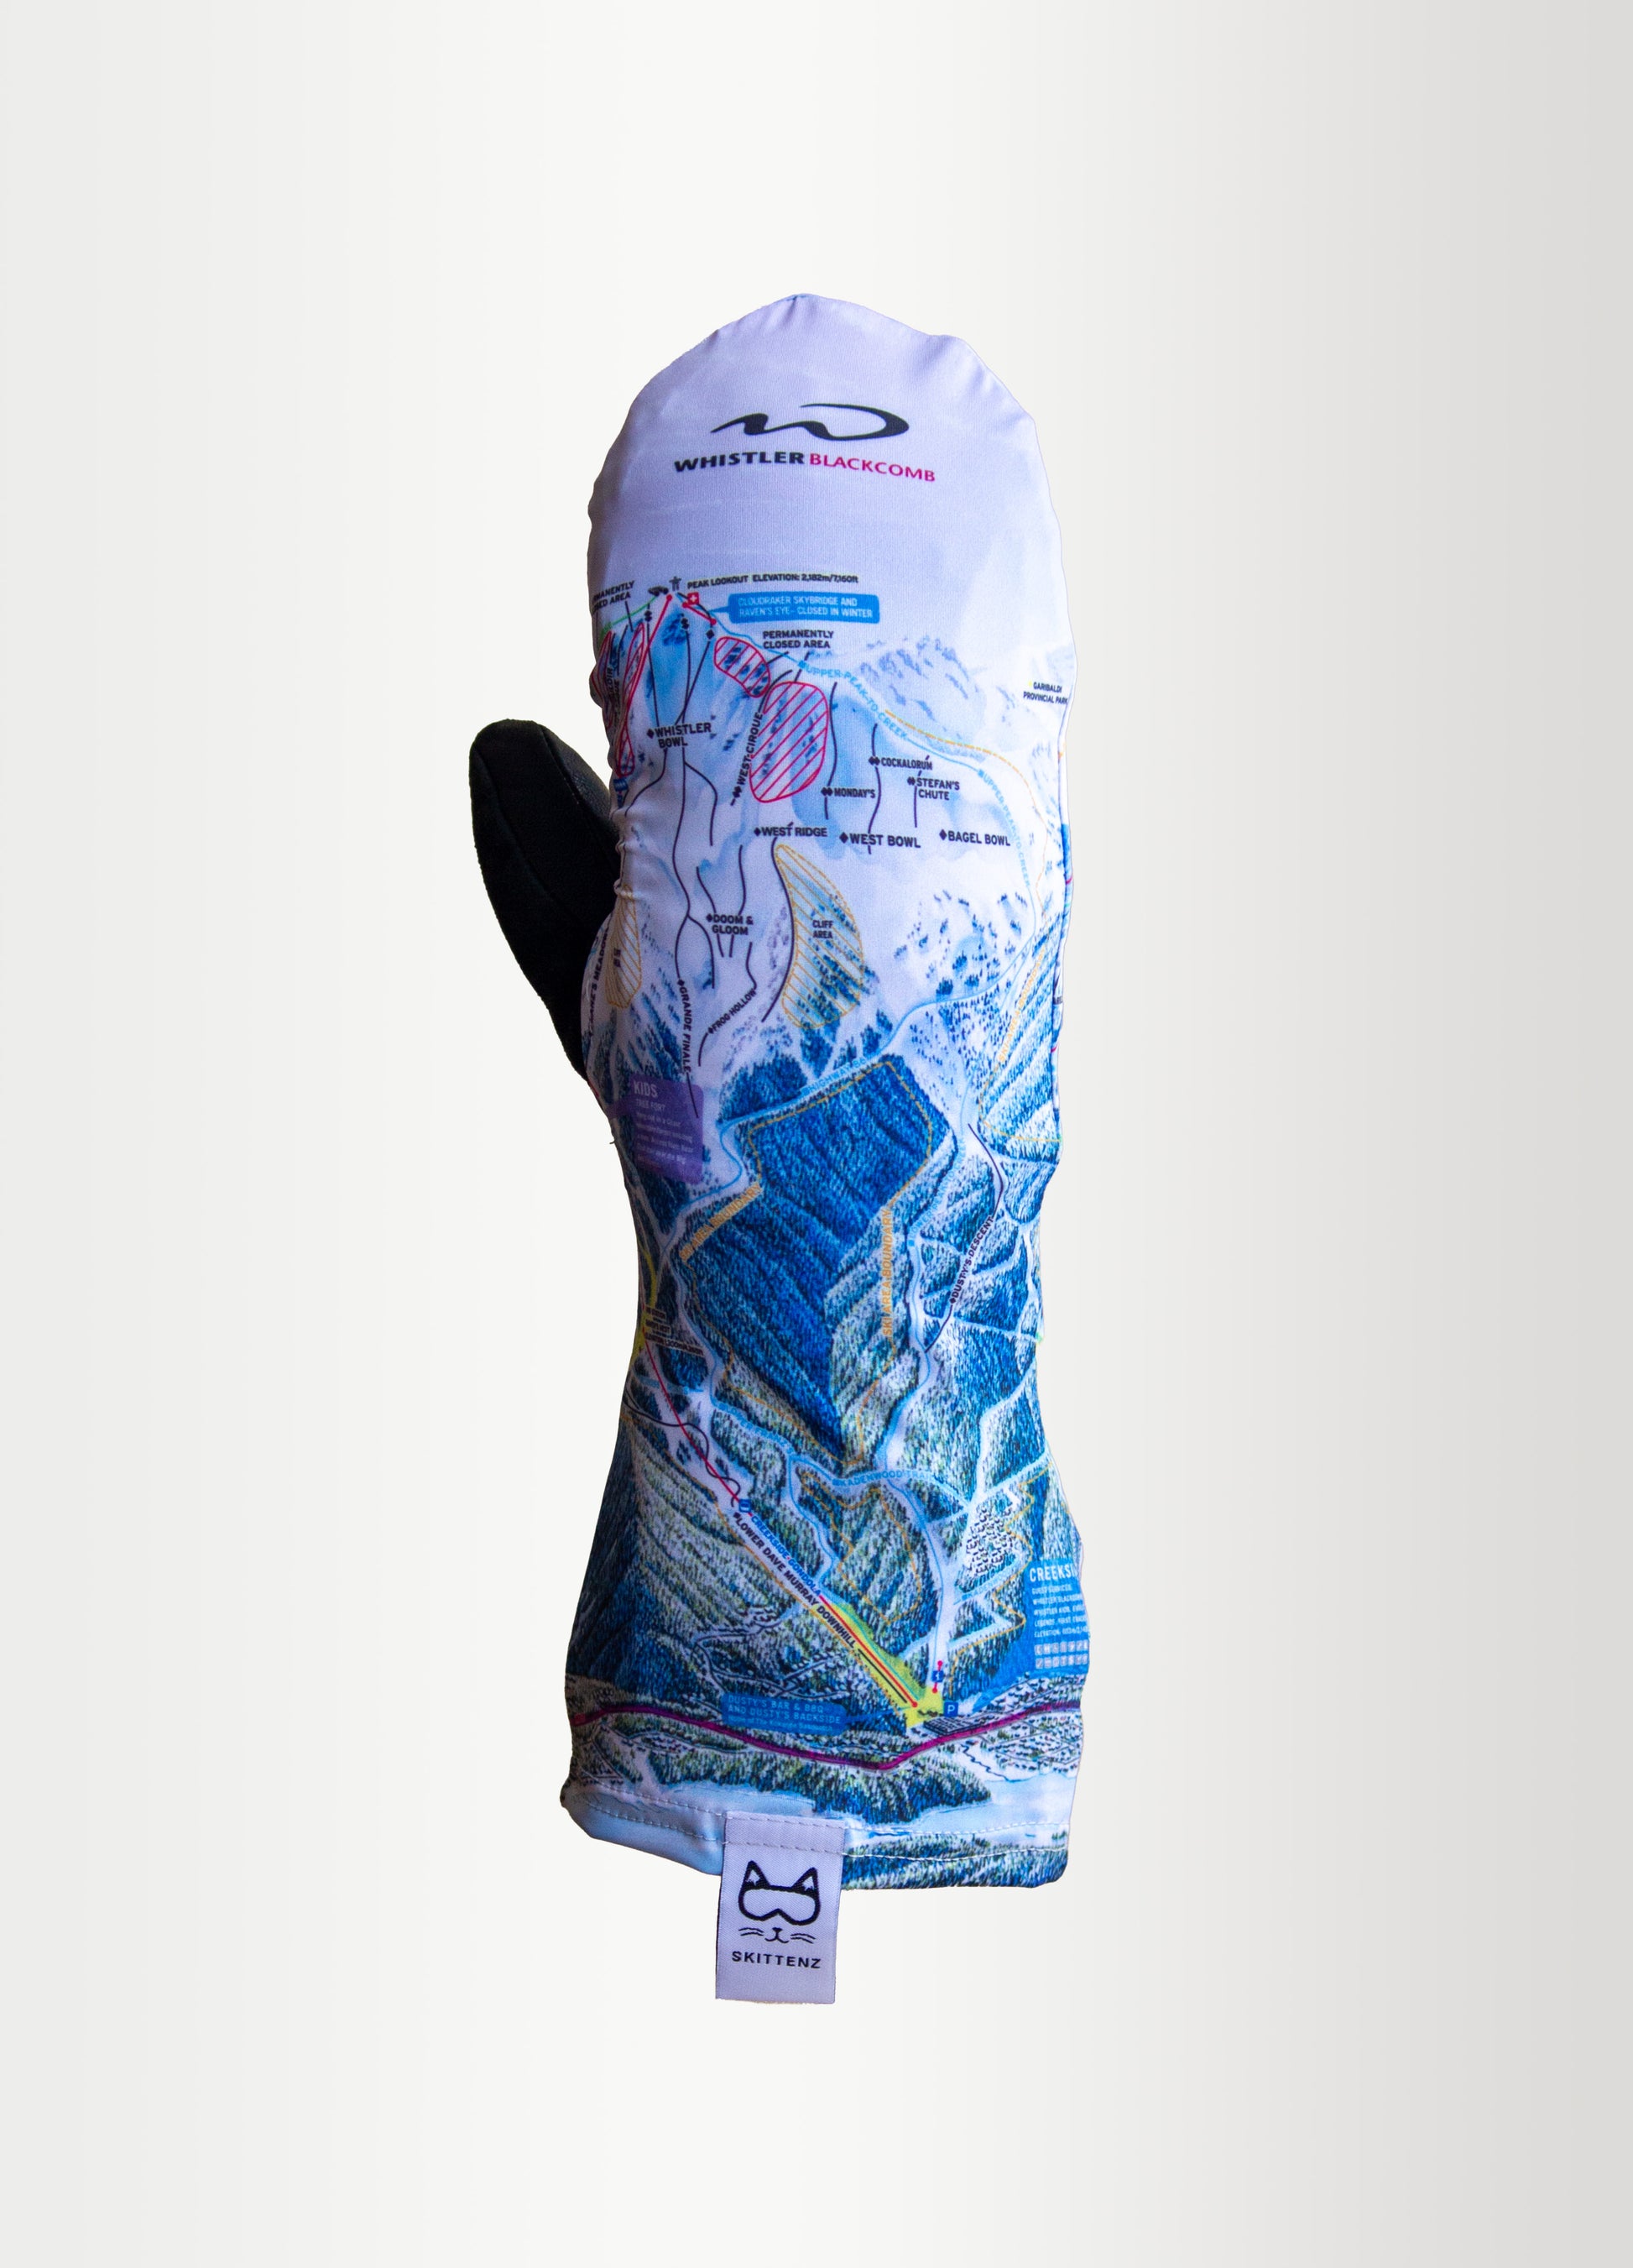 Whistler Blackcomb Ski or Snowboard Trail Map Skins for Mittens or Gloves